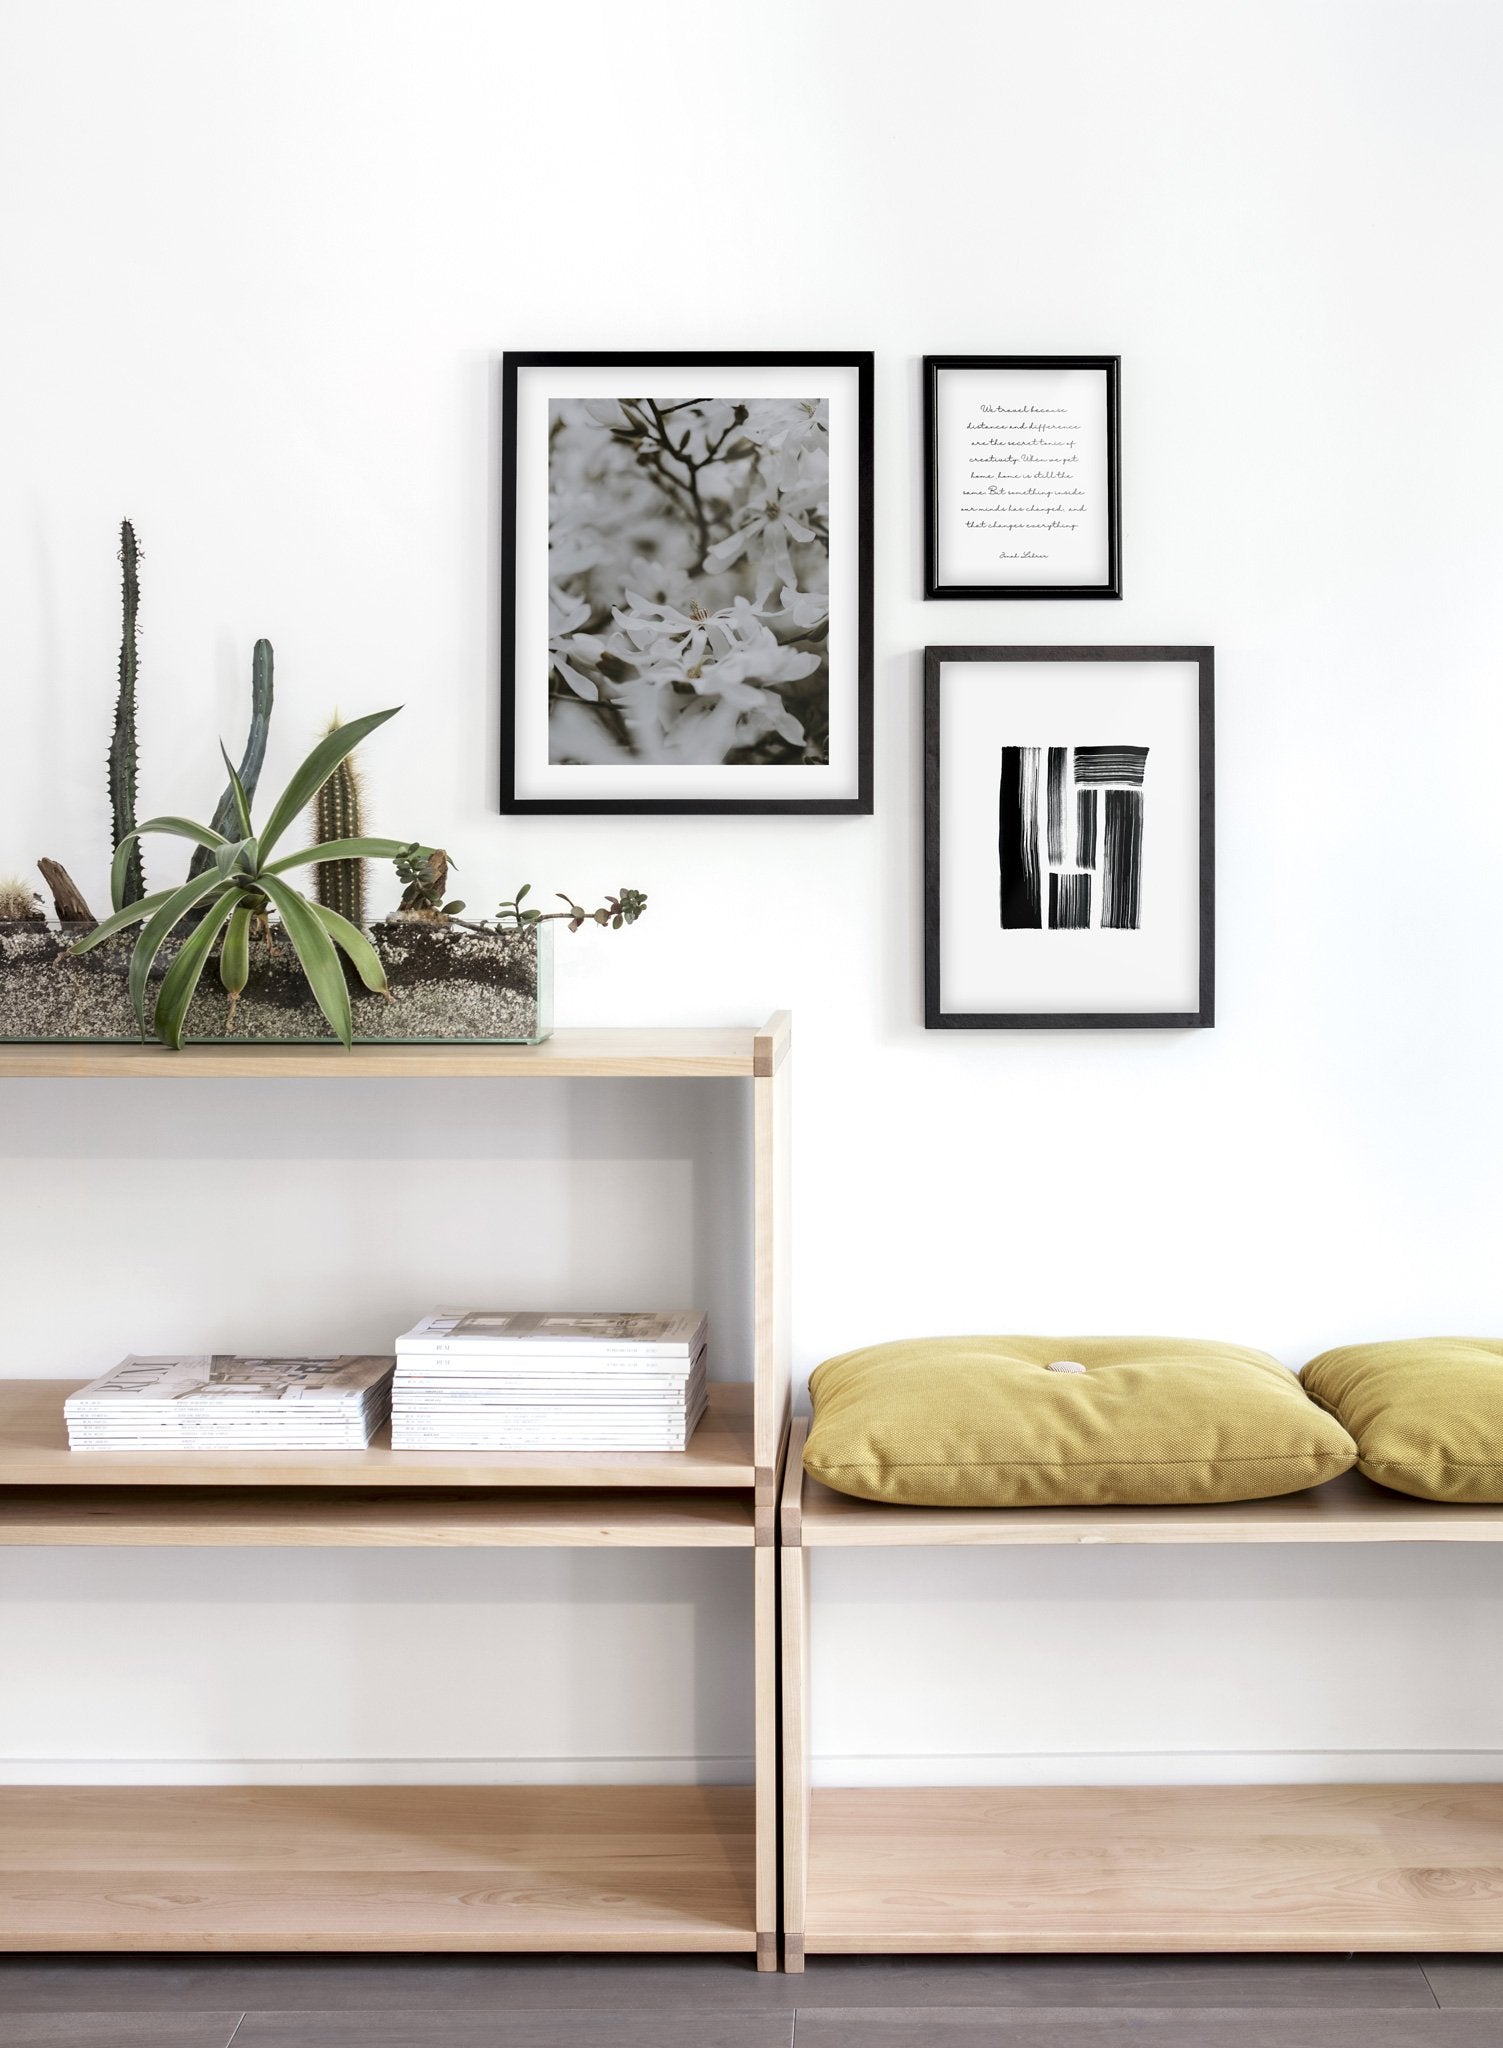 Bed of flowers modern minimalist photography poster by Opposite Wall - Entryway with poster trio